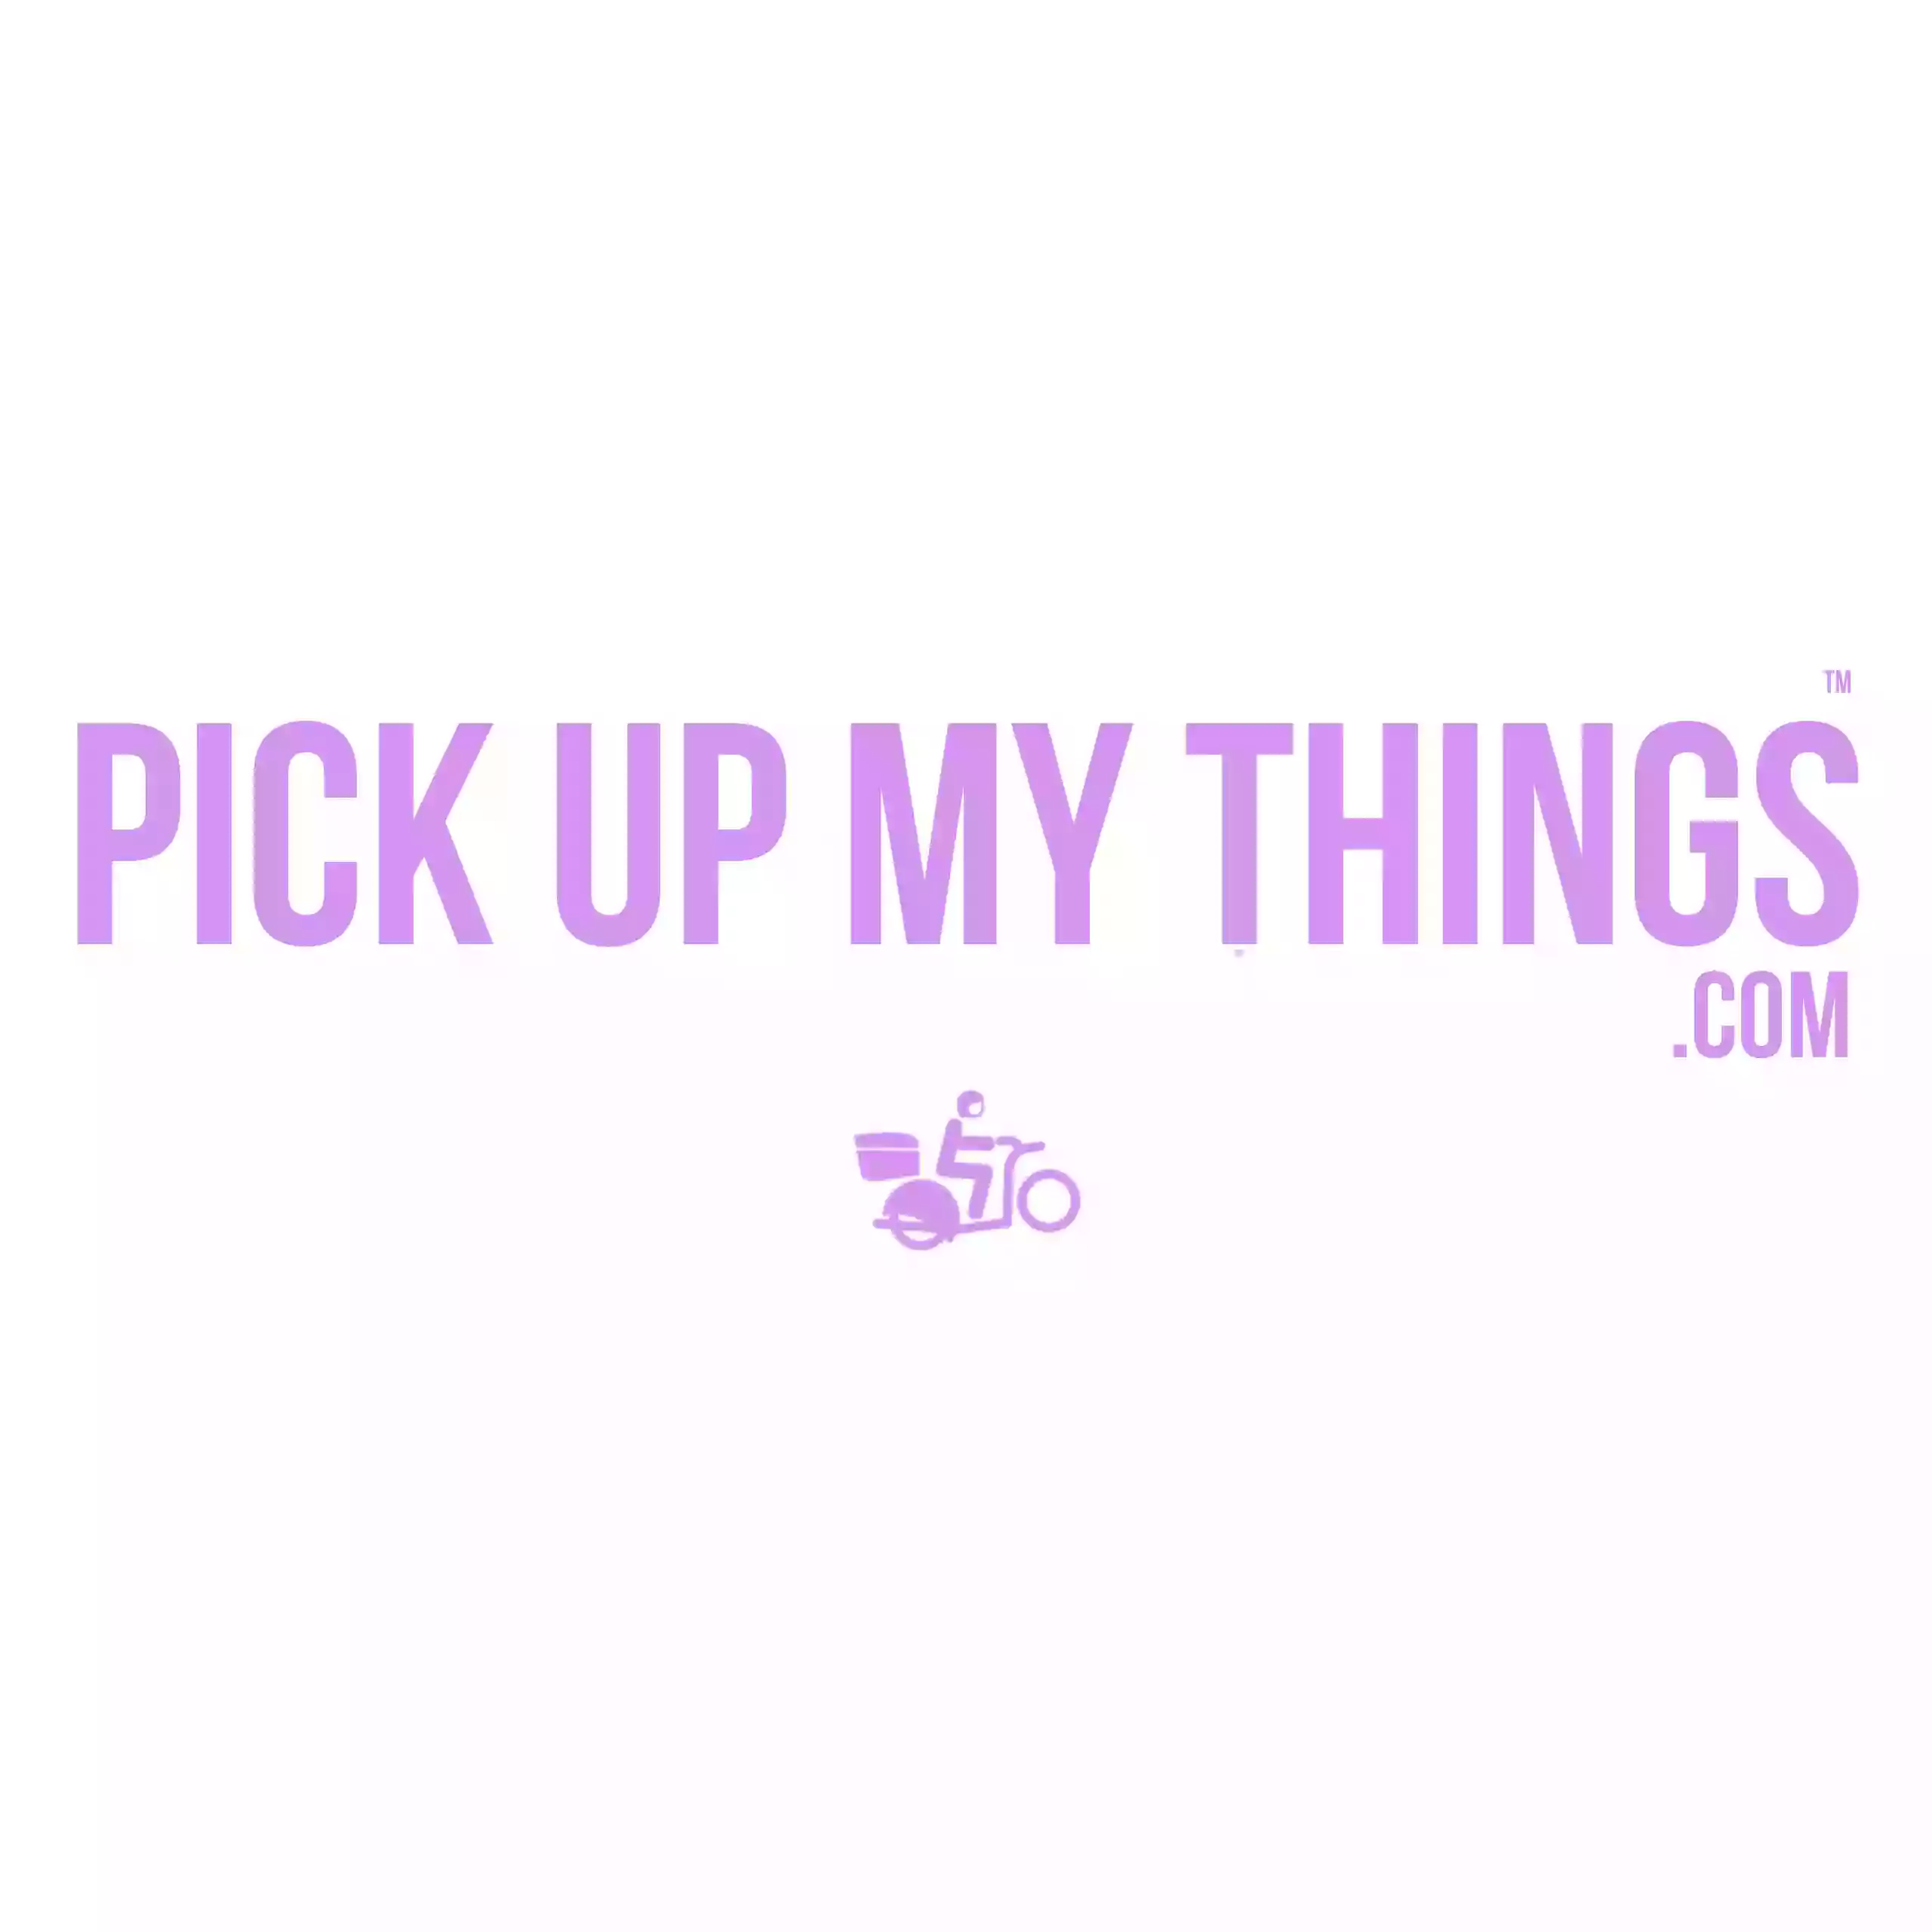 PICK UP MY THINGS